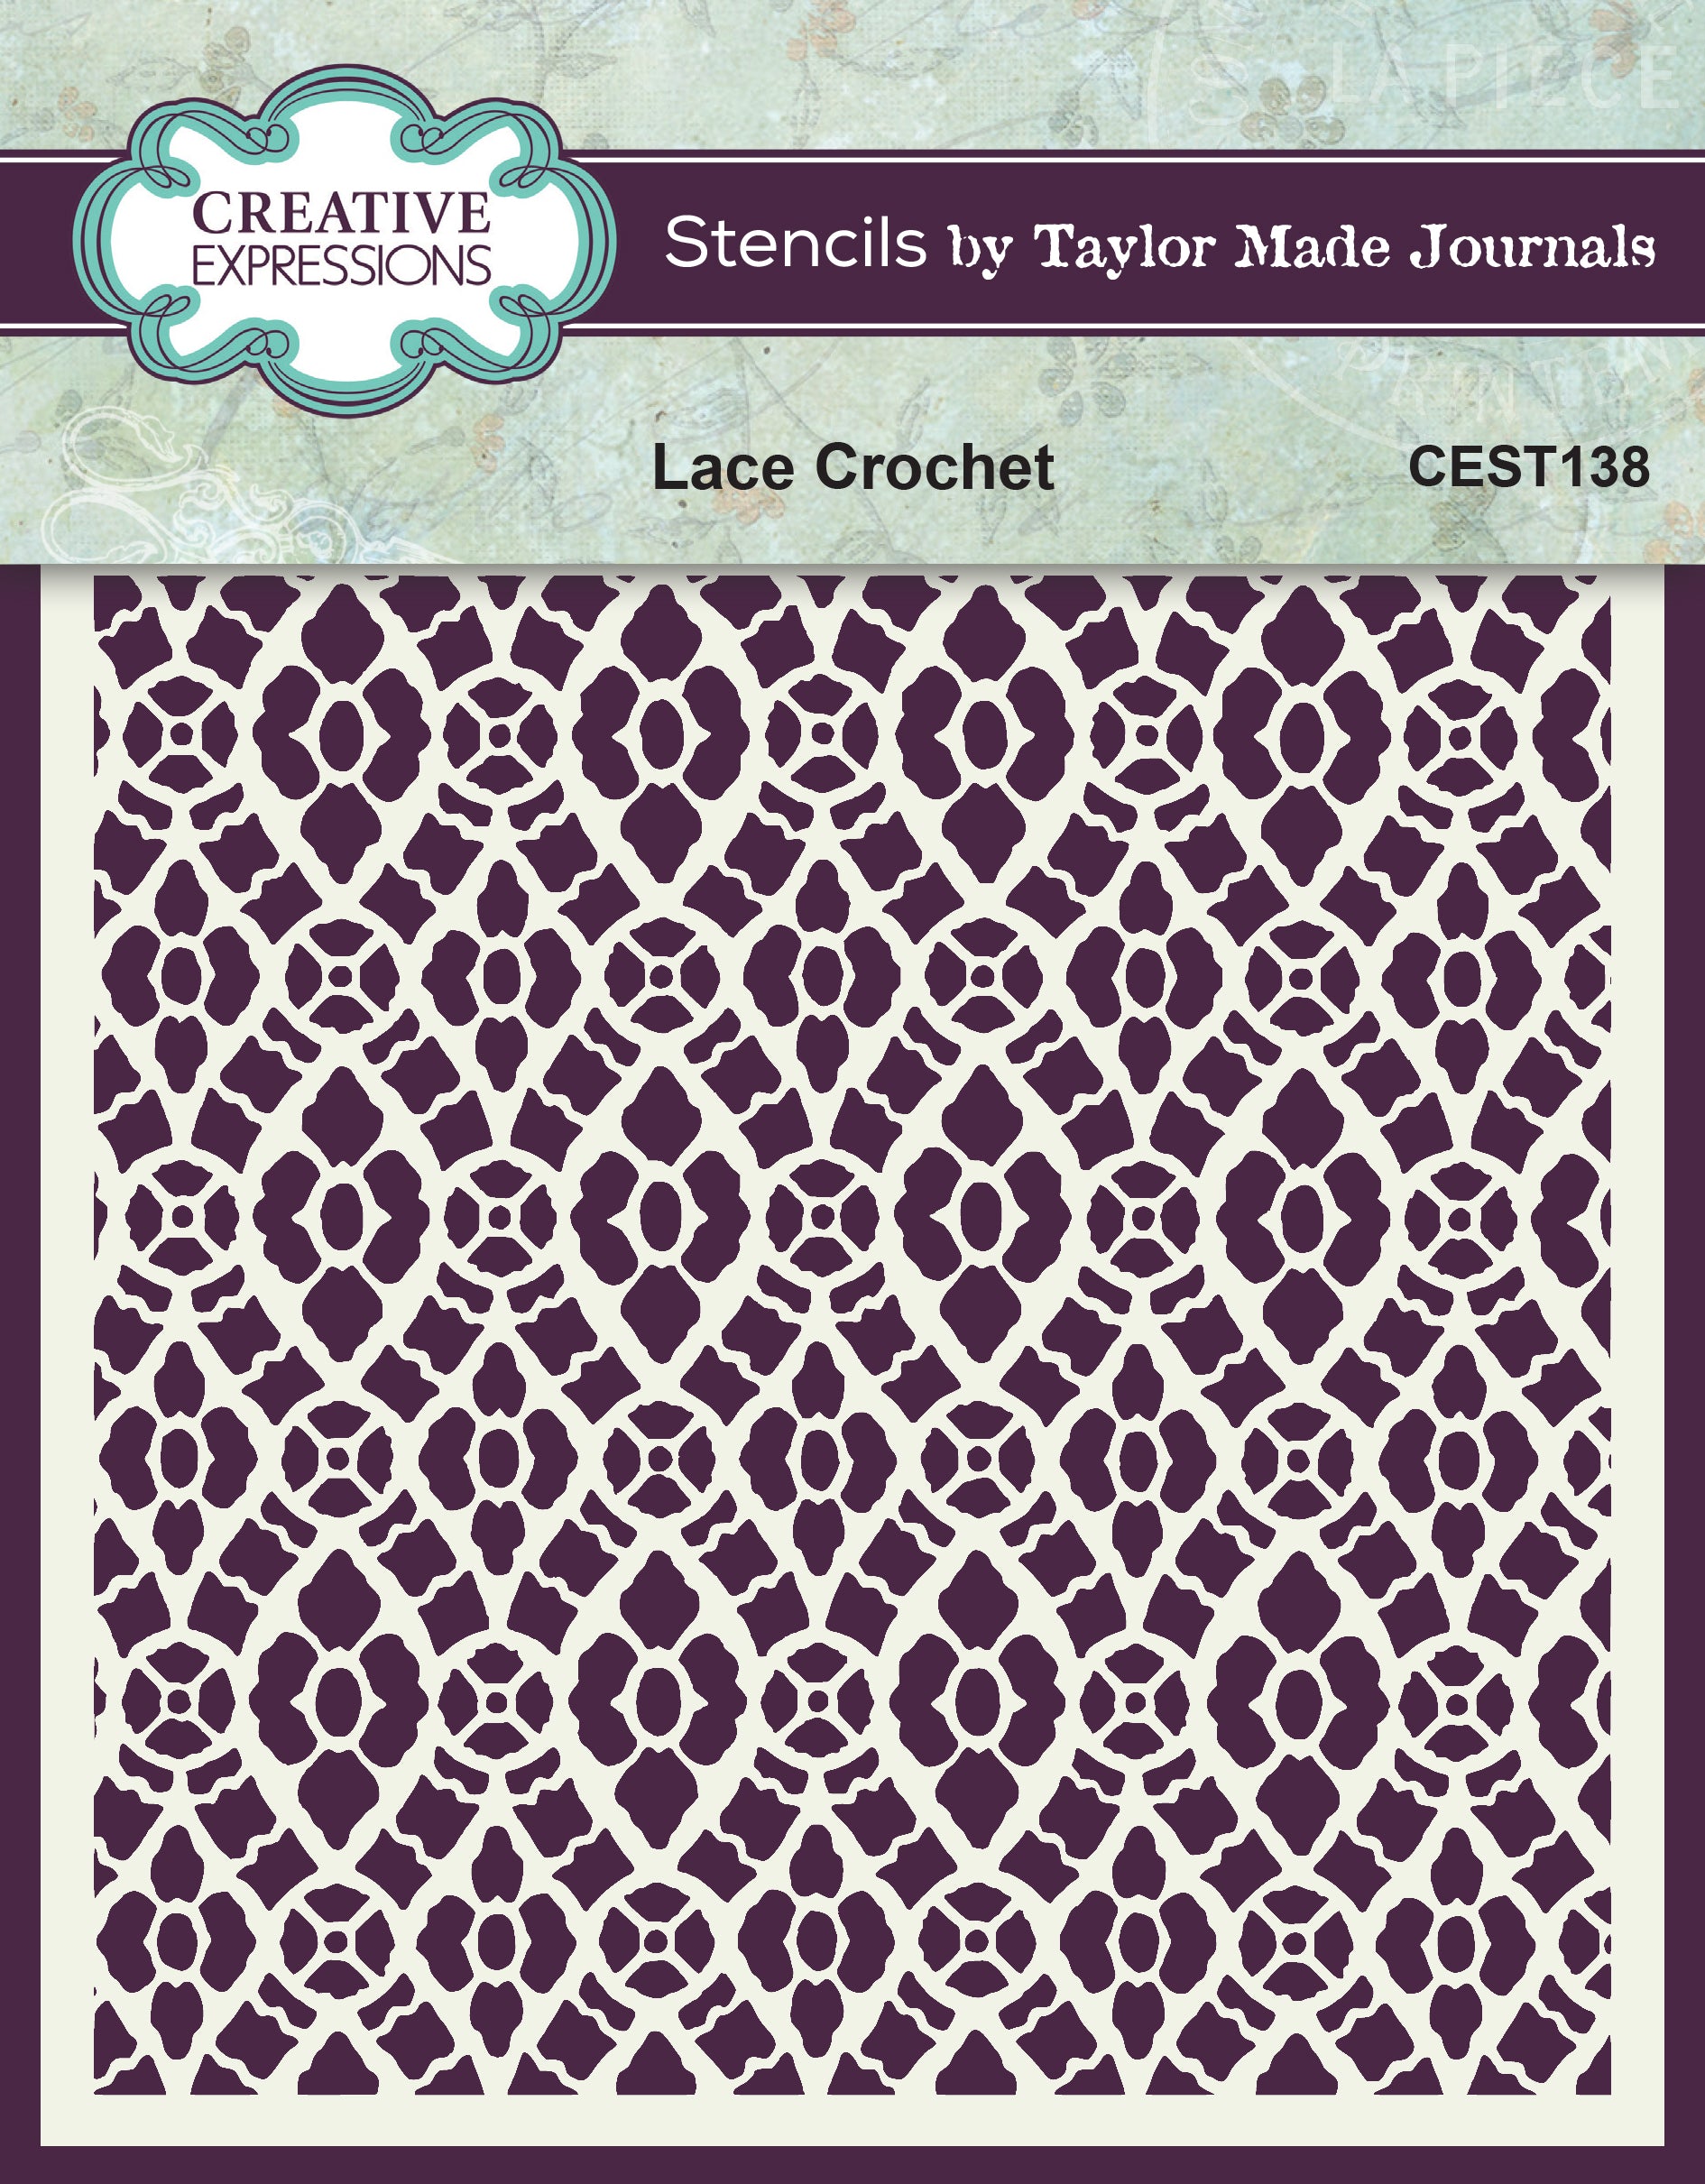 Creative Expressions Taylor Made Journals Lace Crochet 6 in x 6 in  Stencil